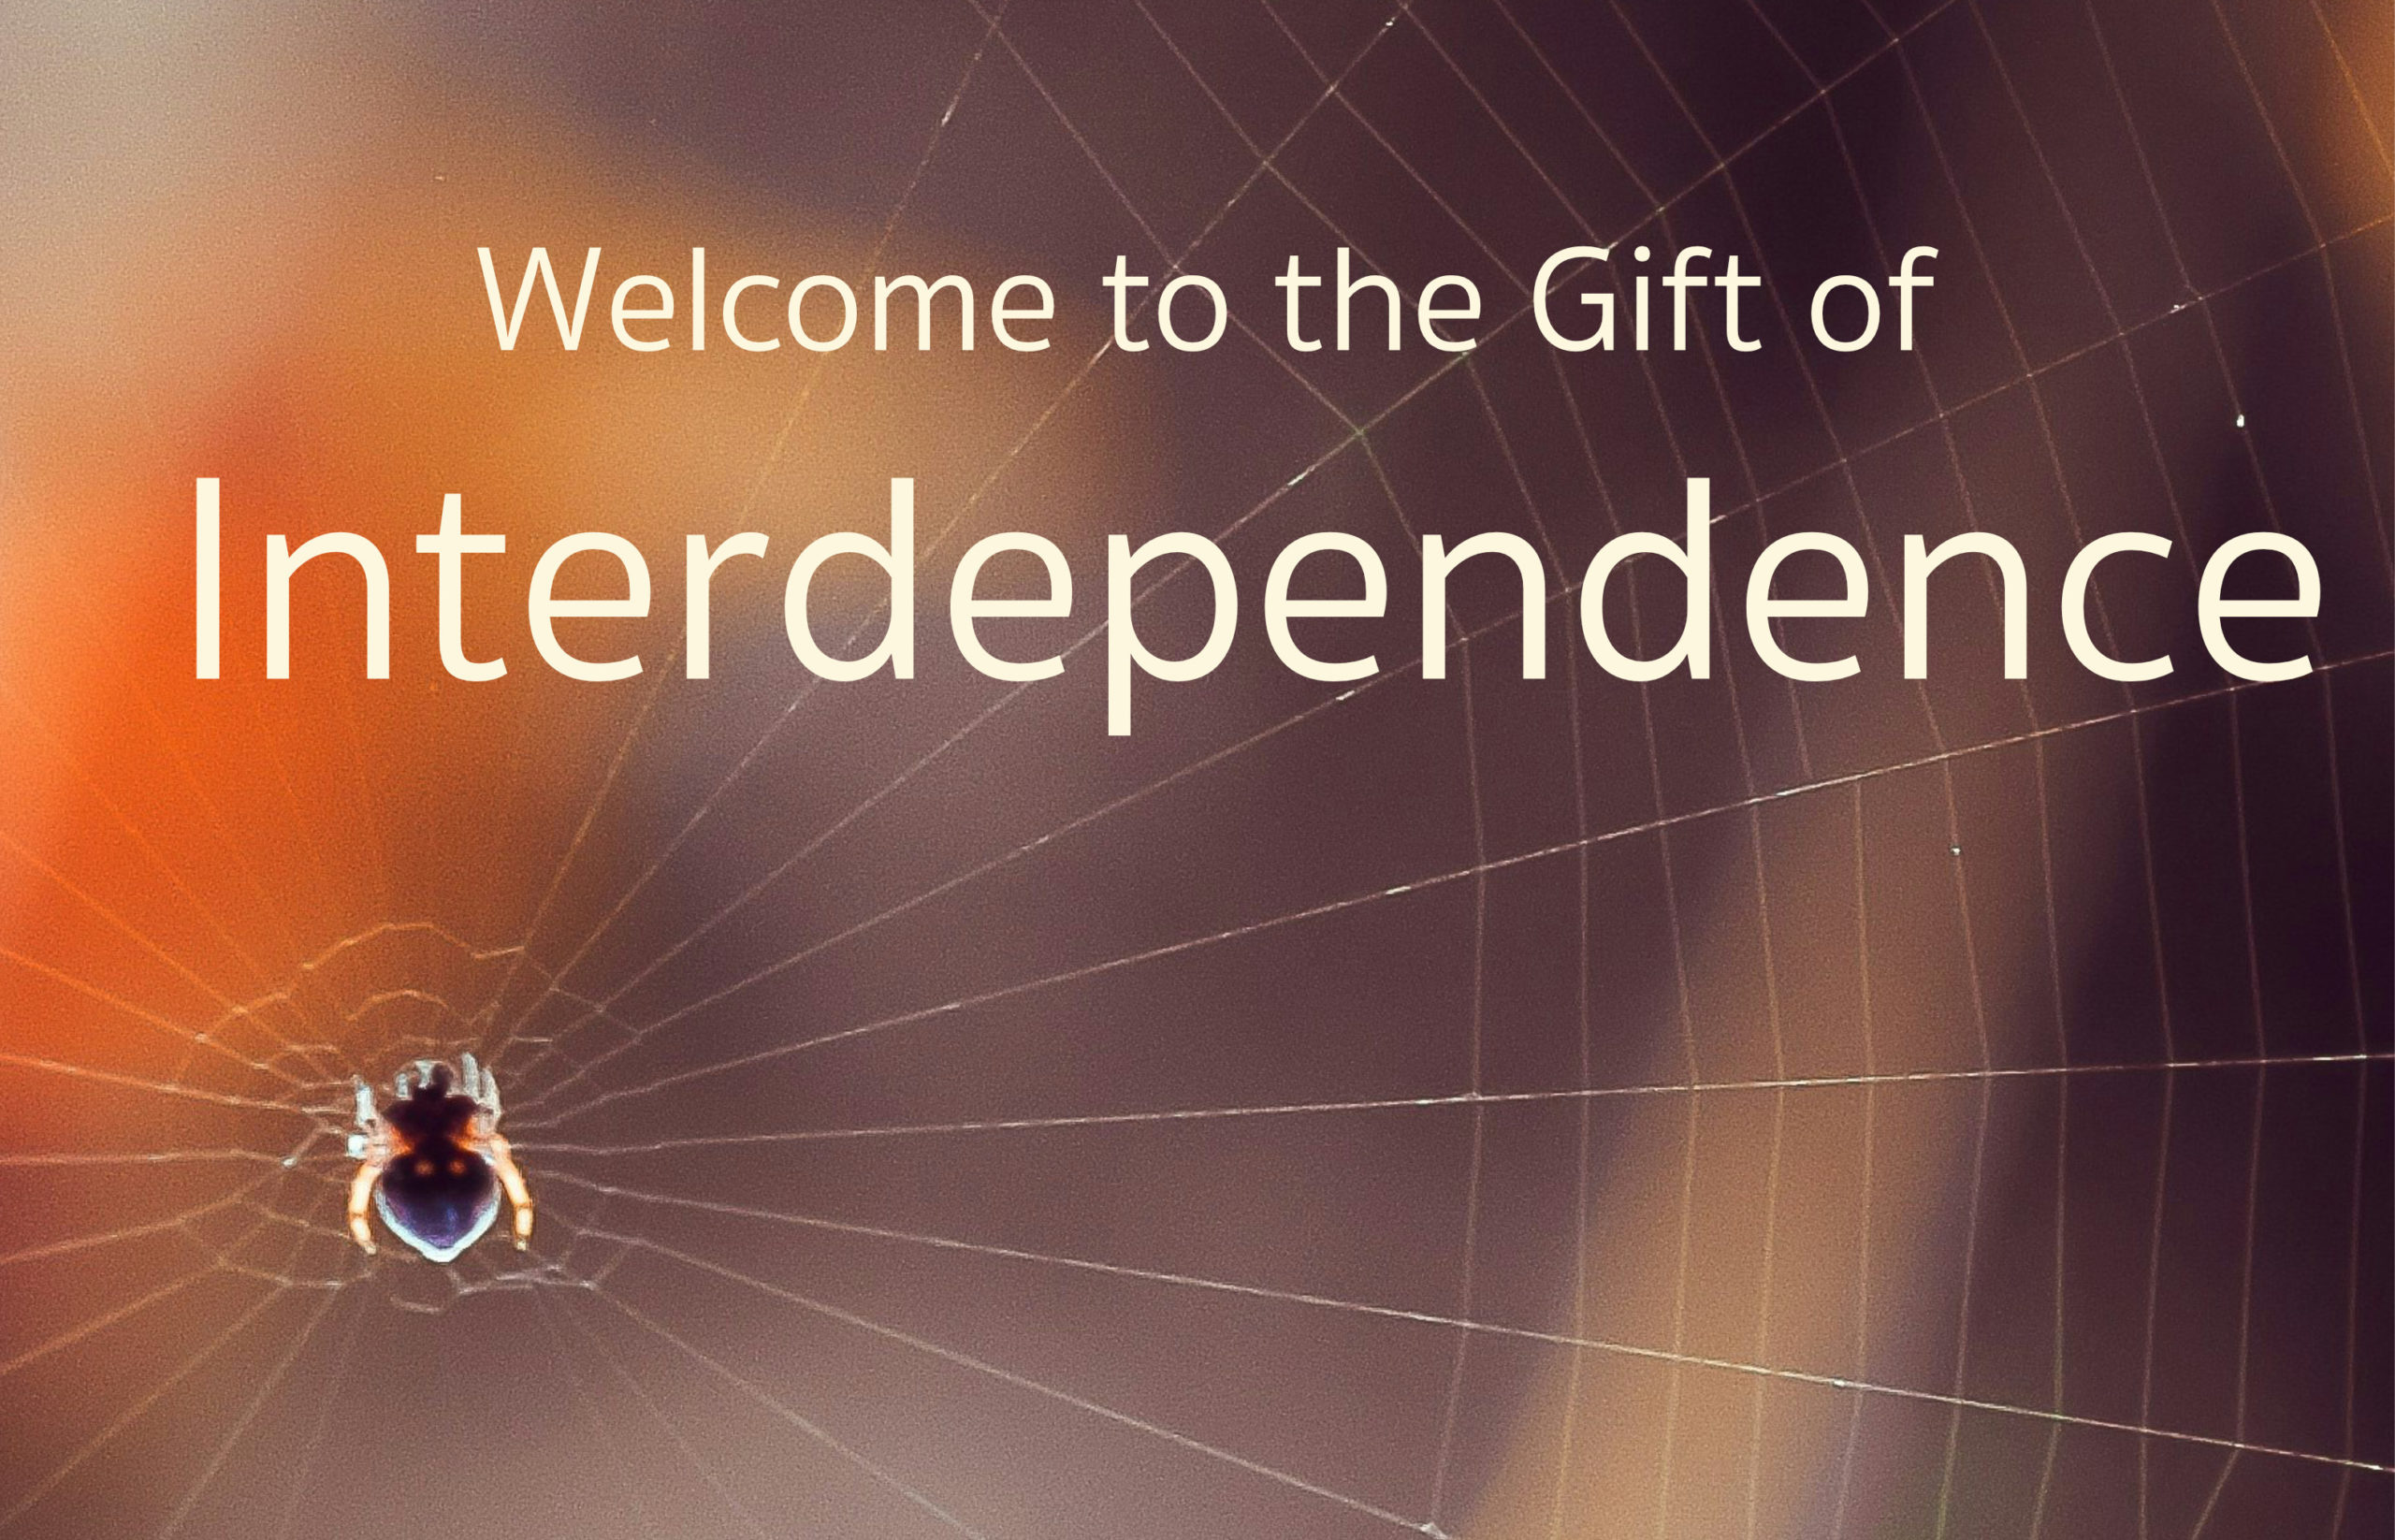 Welcome to the Gift of Interdependence